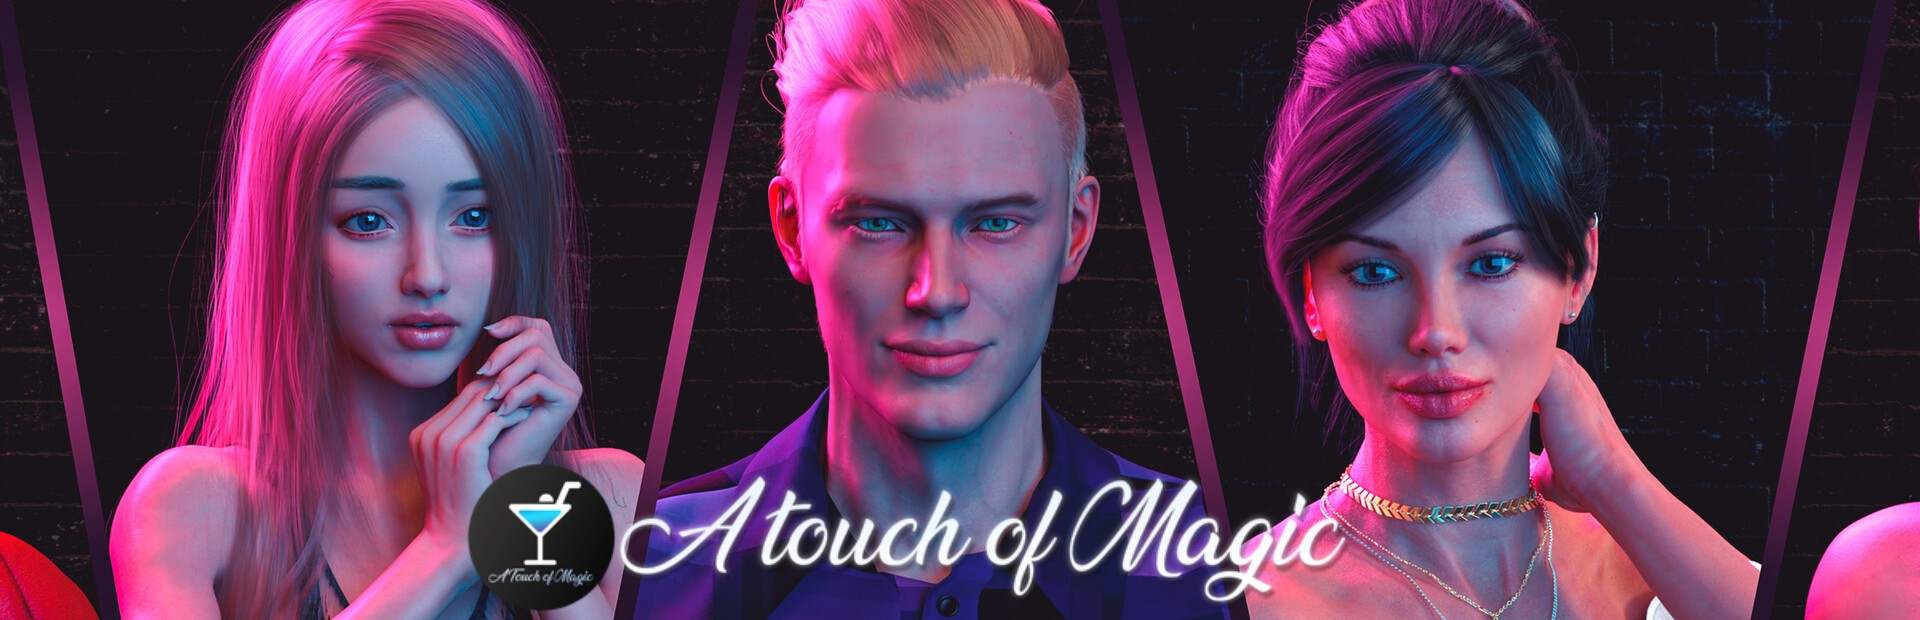 A Touch of Magic [First Sin JAD] Adult xxx Game Download